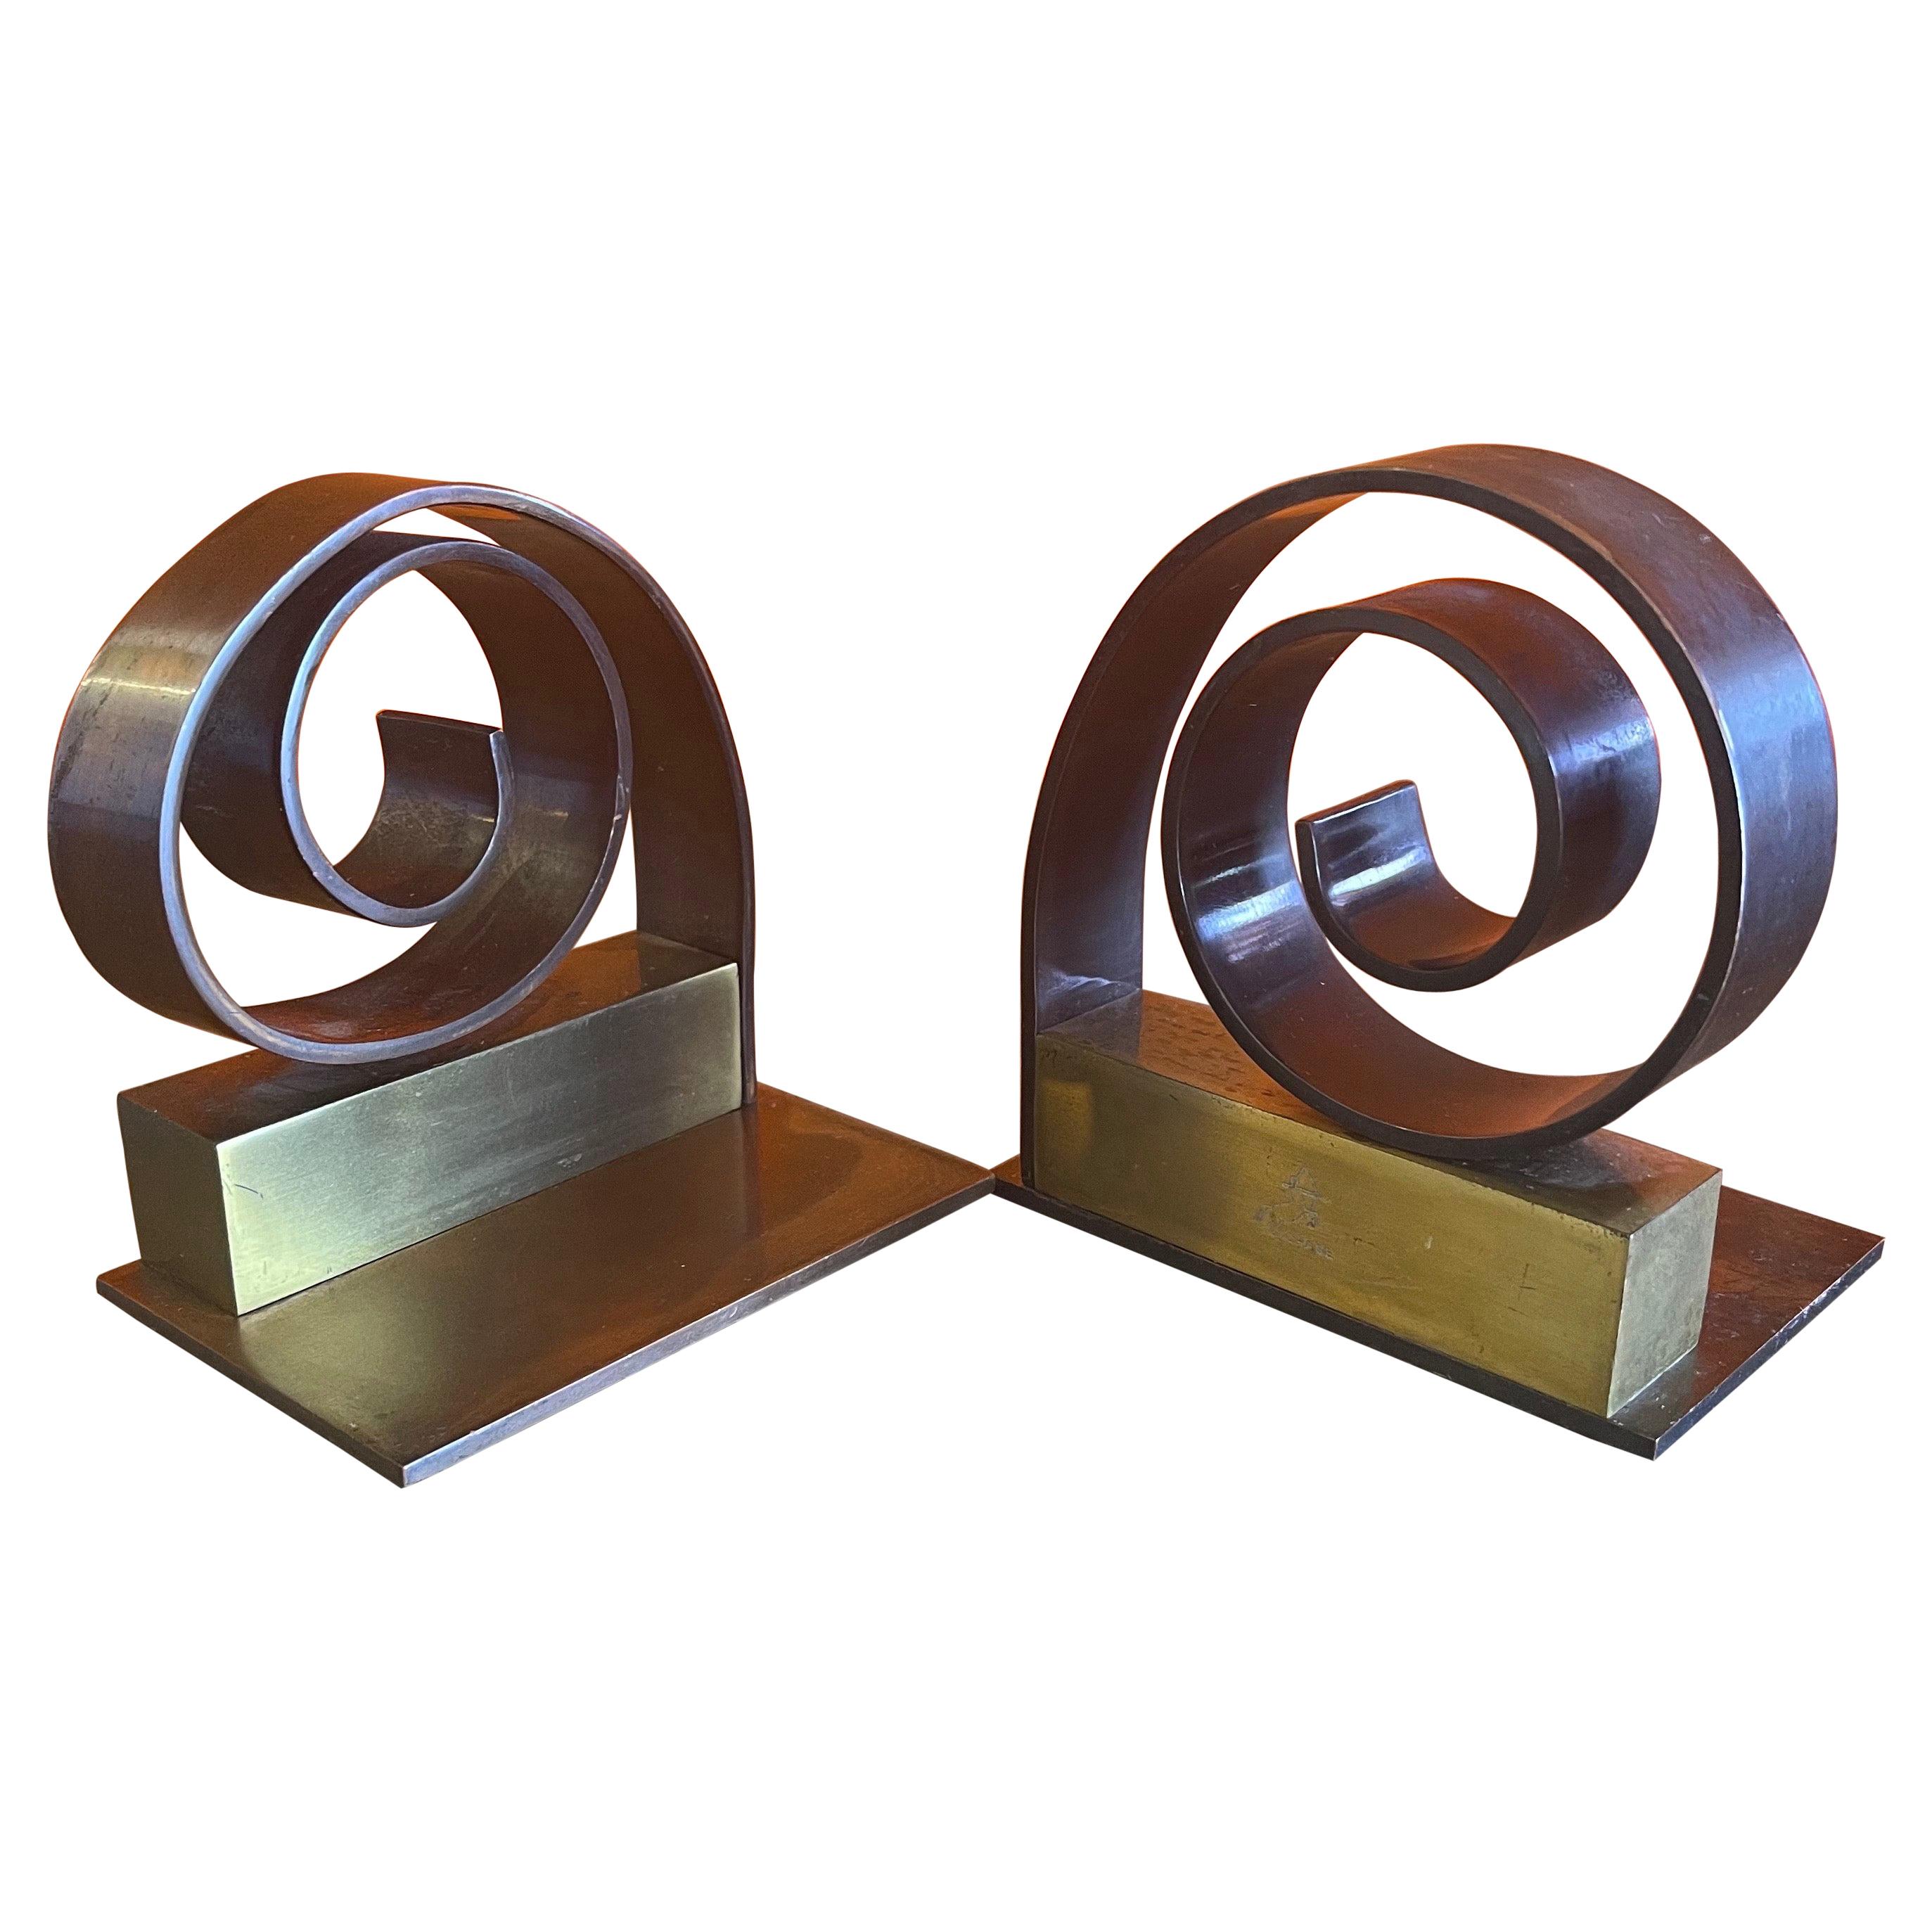 Pair of Machine Age Art Deco Bookends by Walter Von Nessen for Chase & Co.